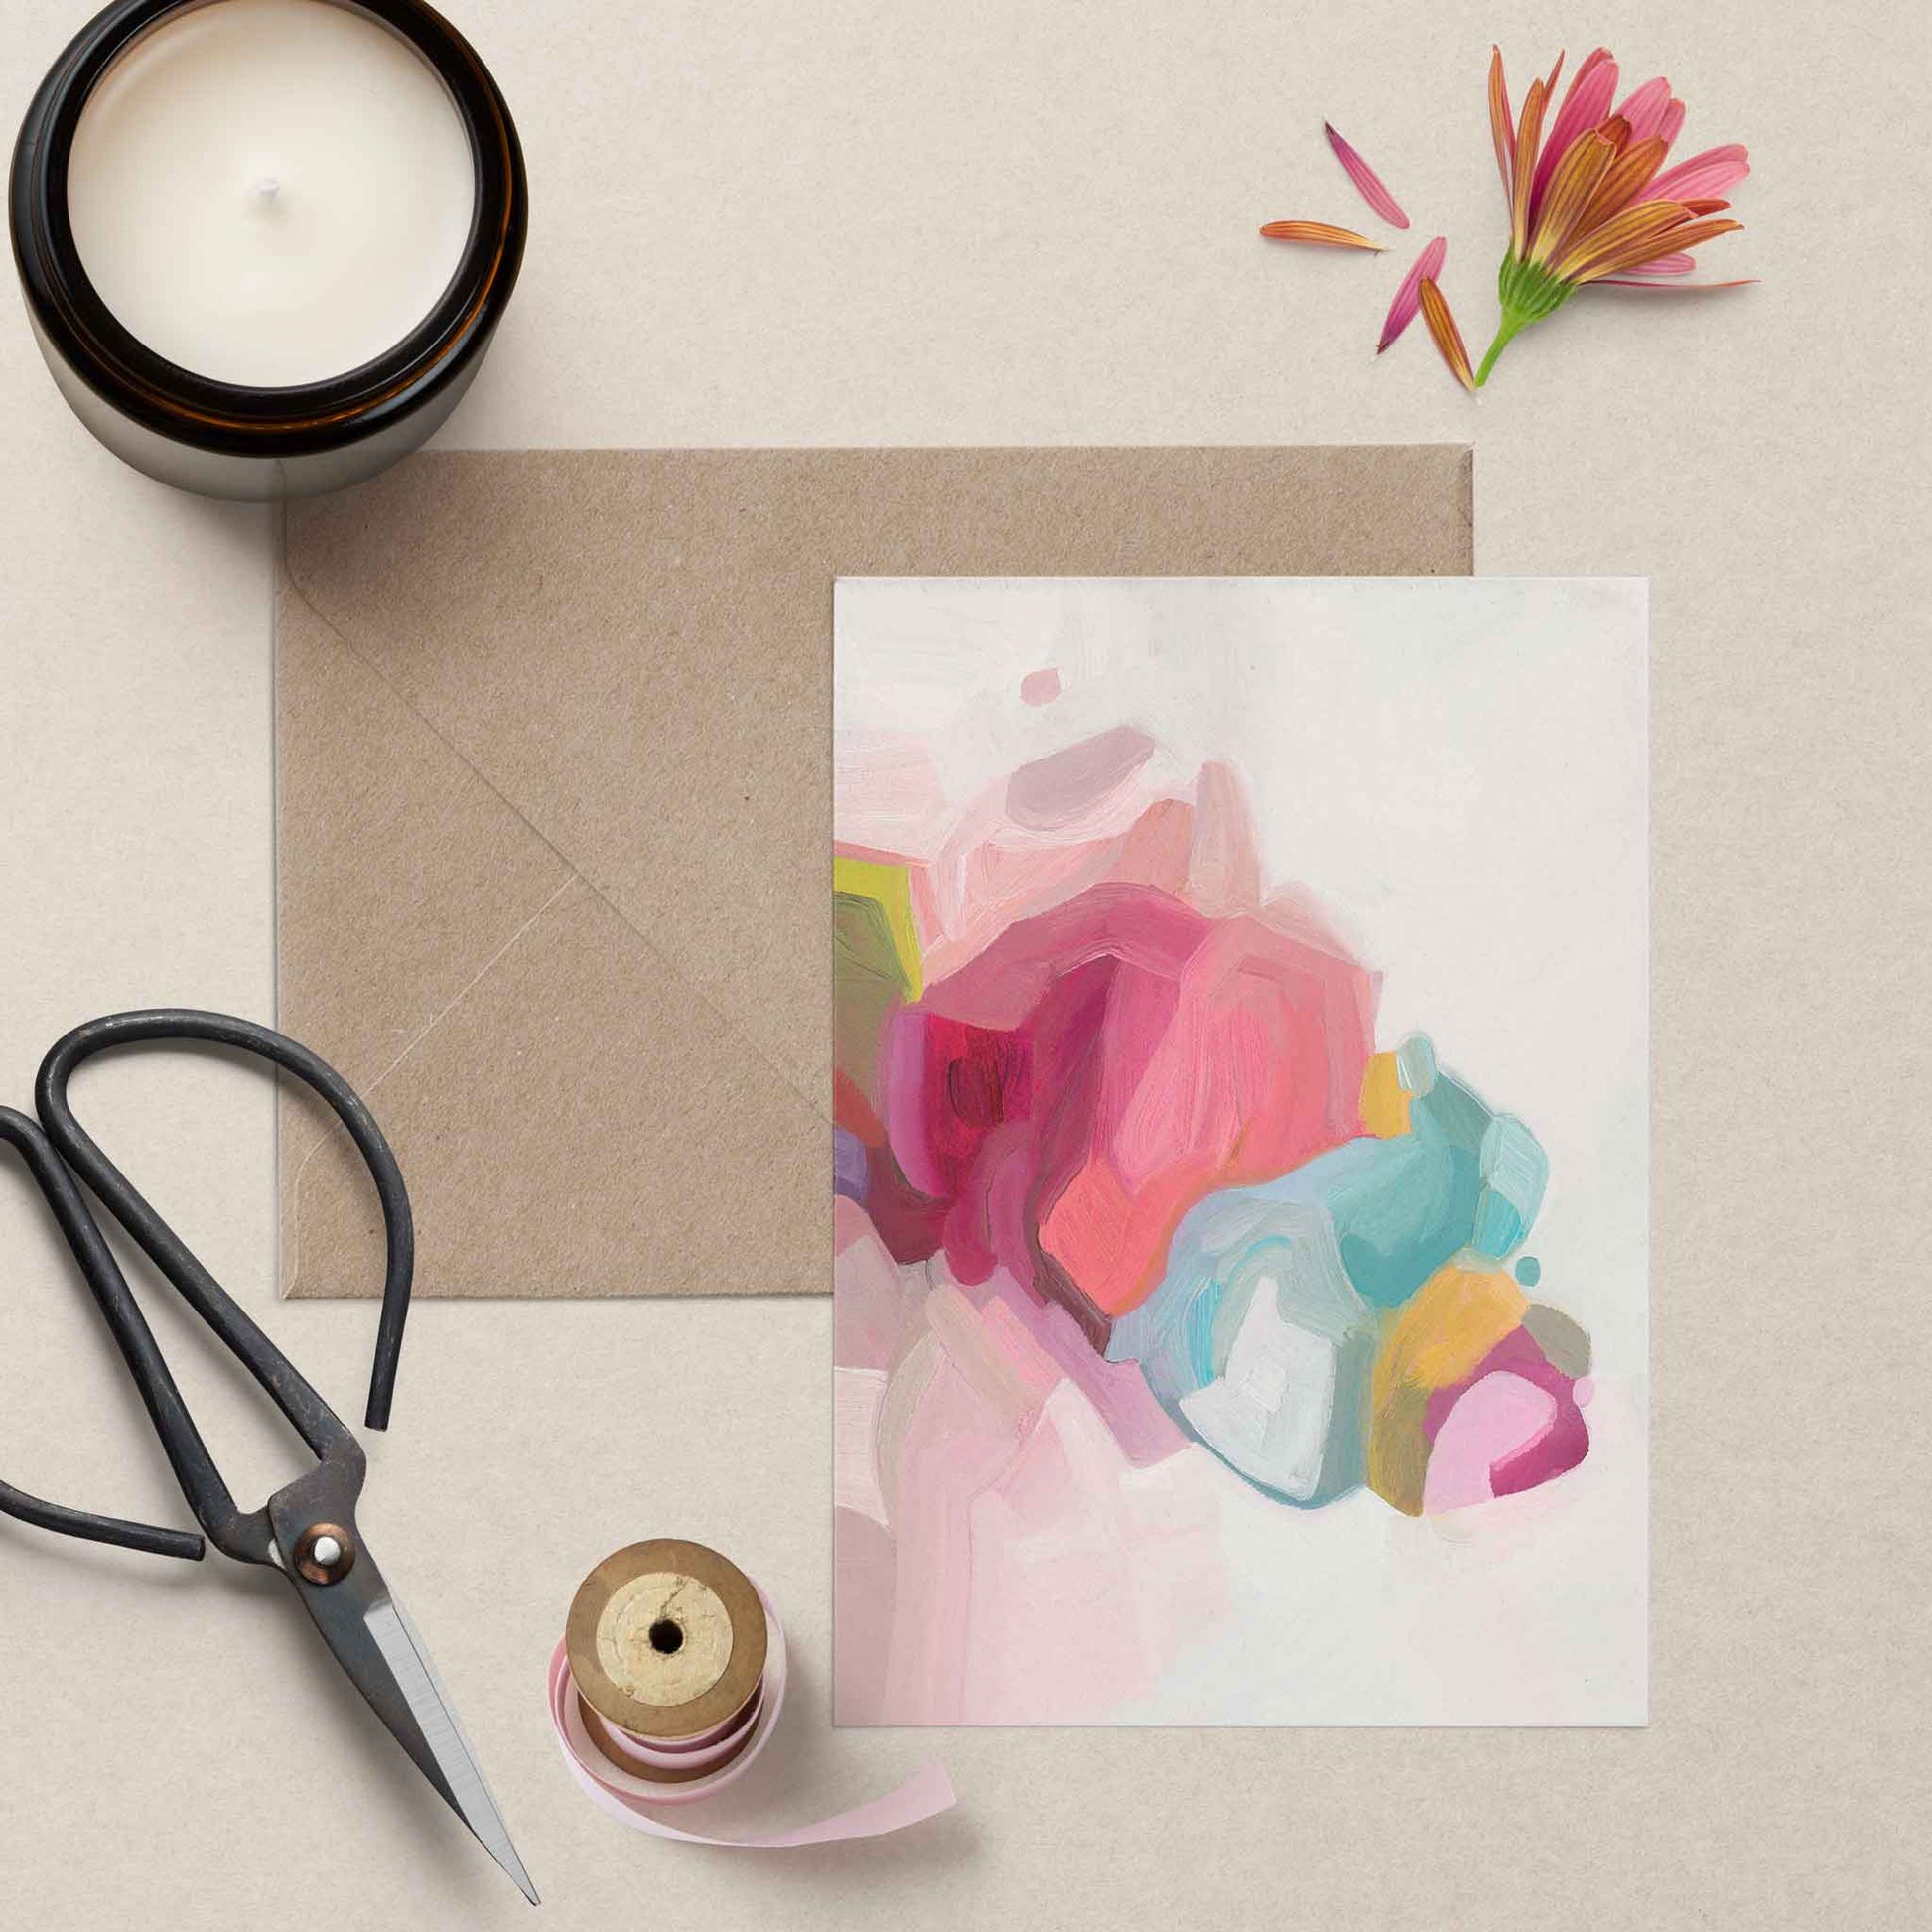 blank art card with pastel abstract artwork and kraft envelope